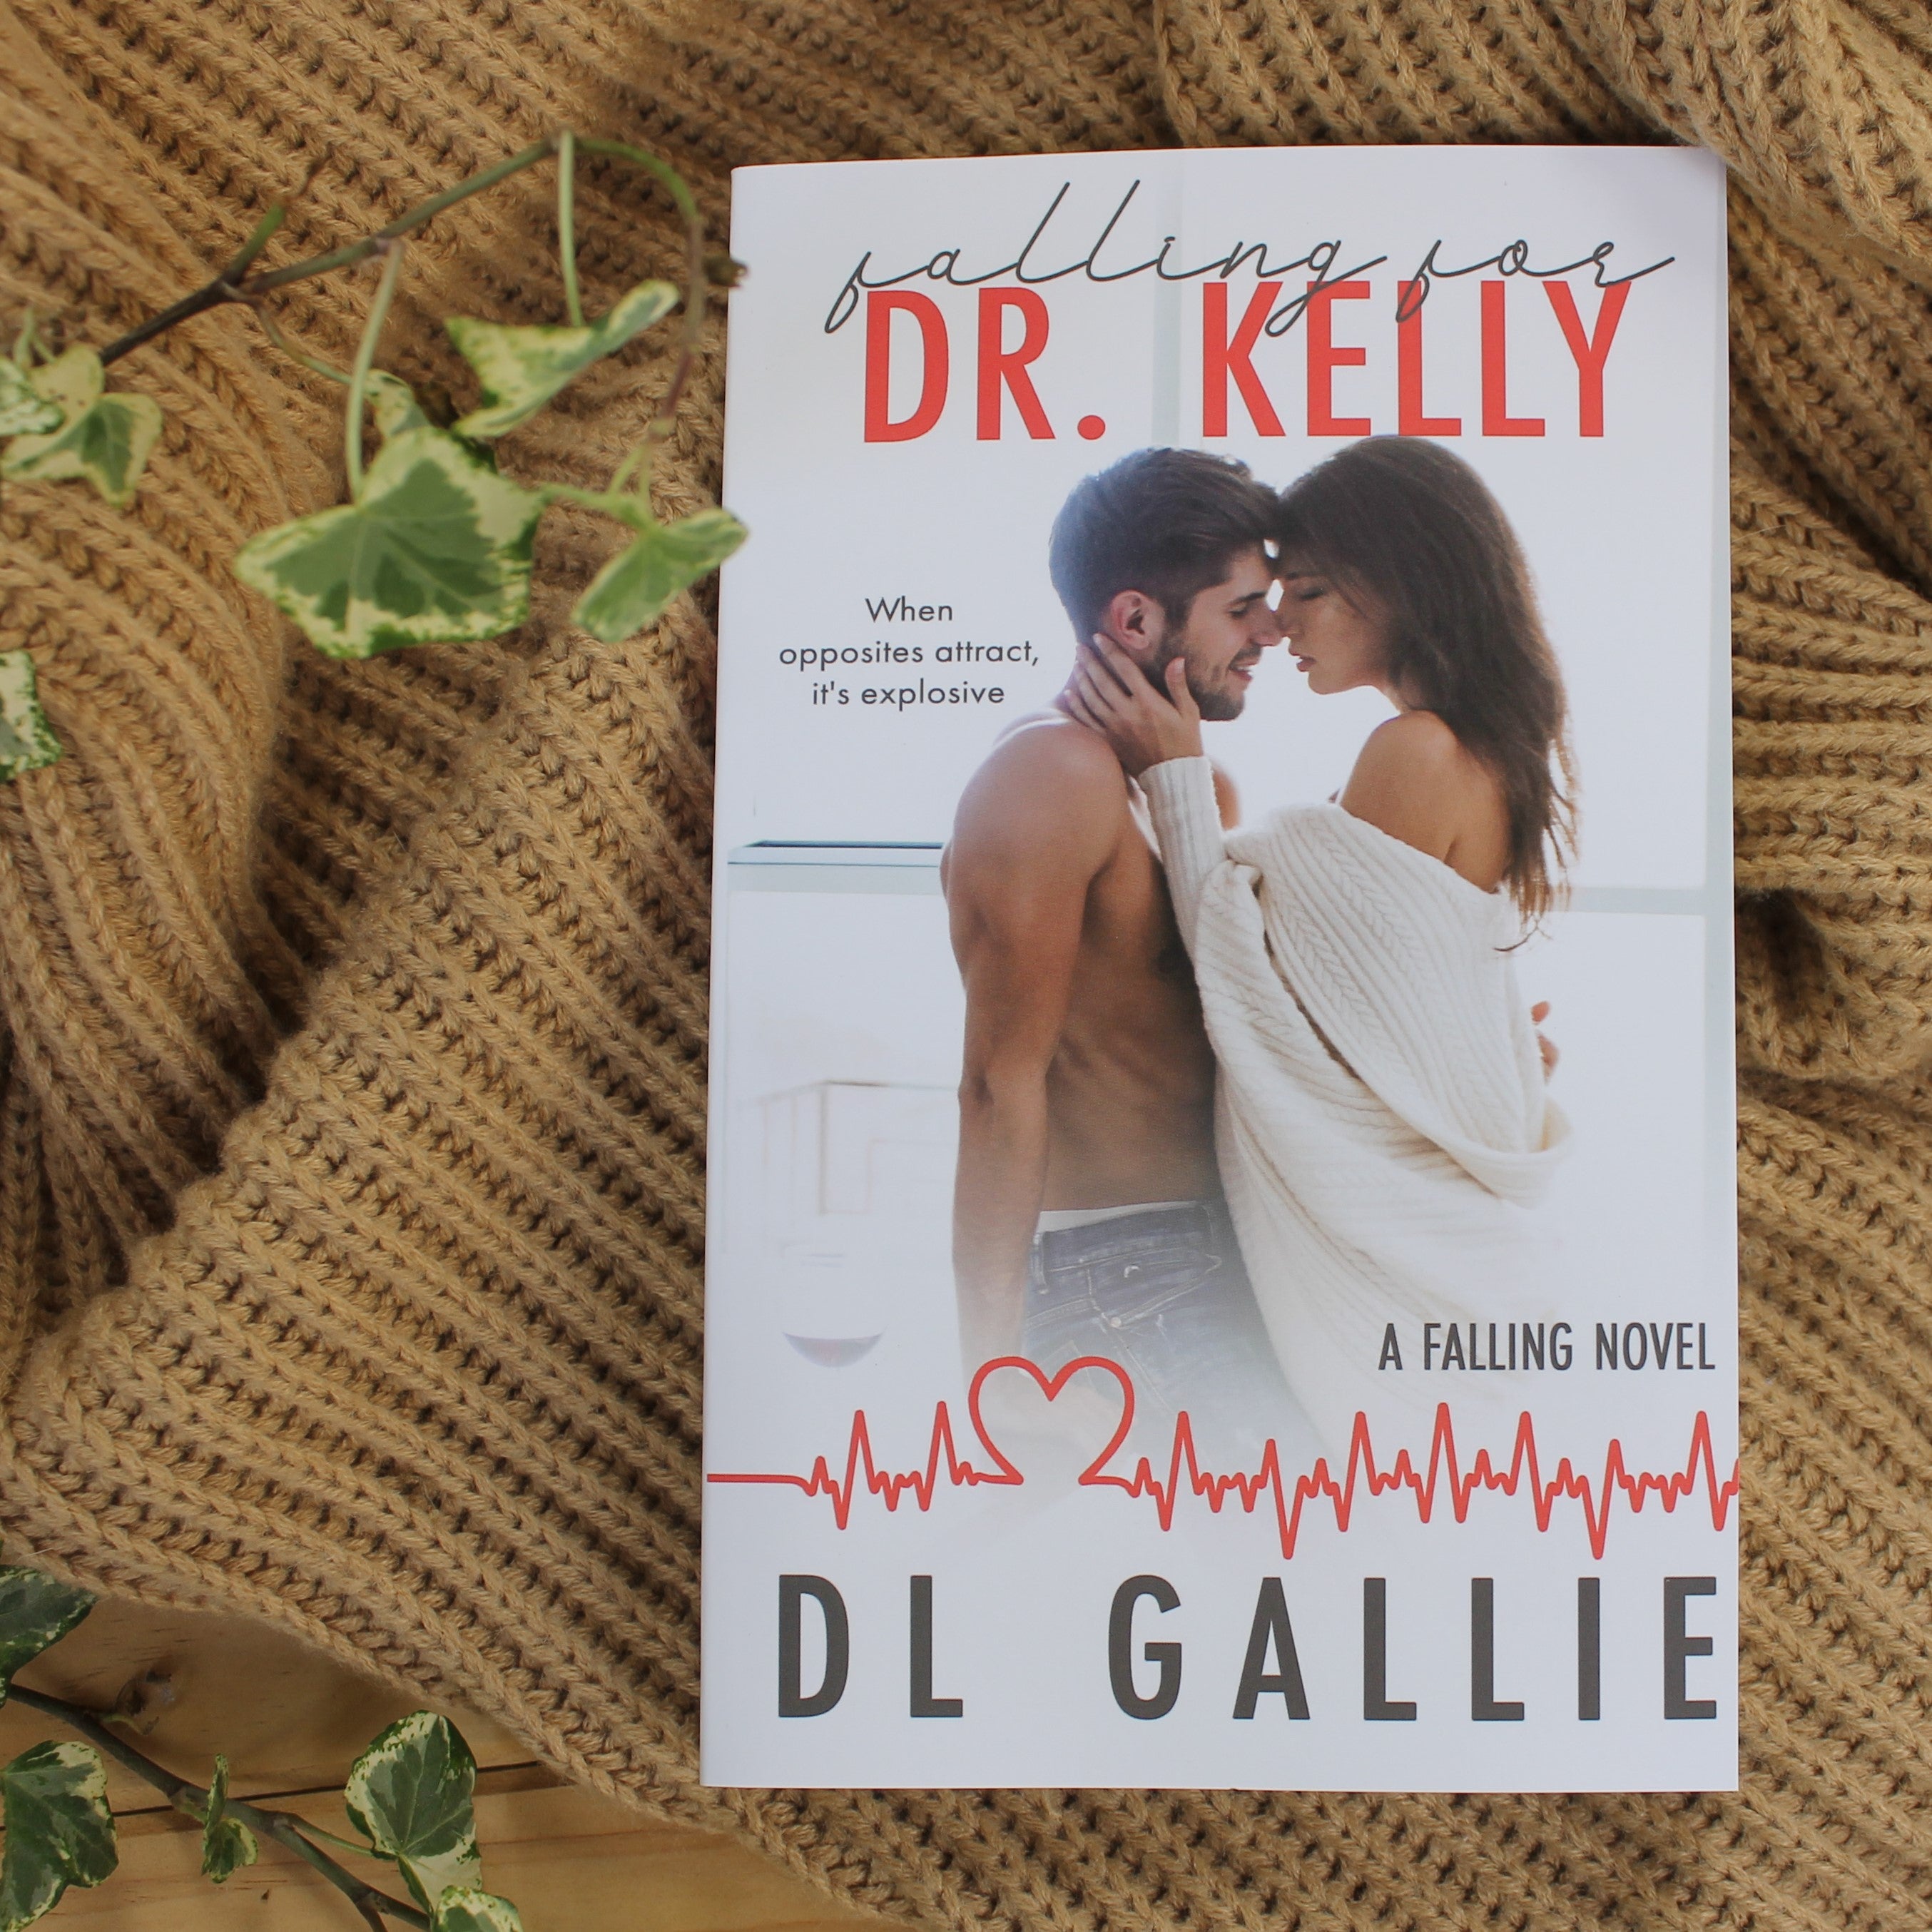 Falling for DR. Kelly by DL Gallie